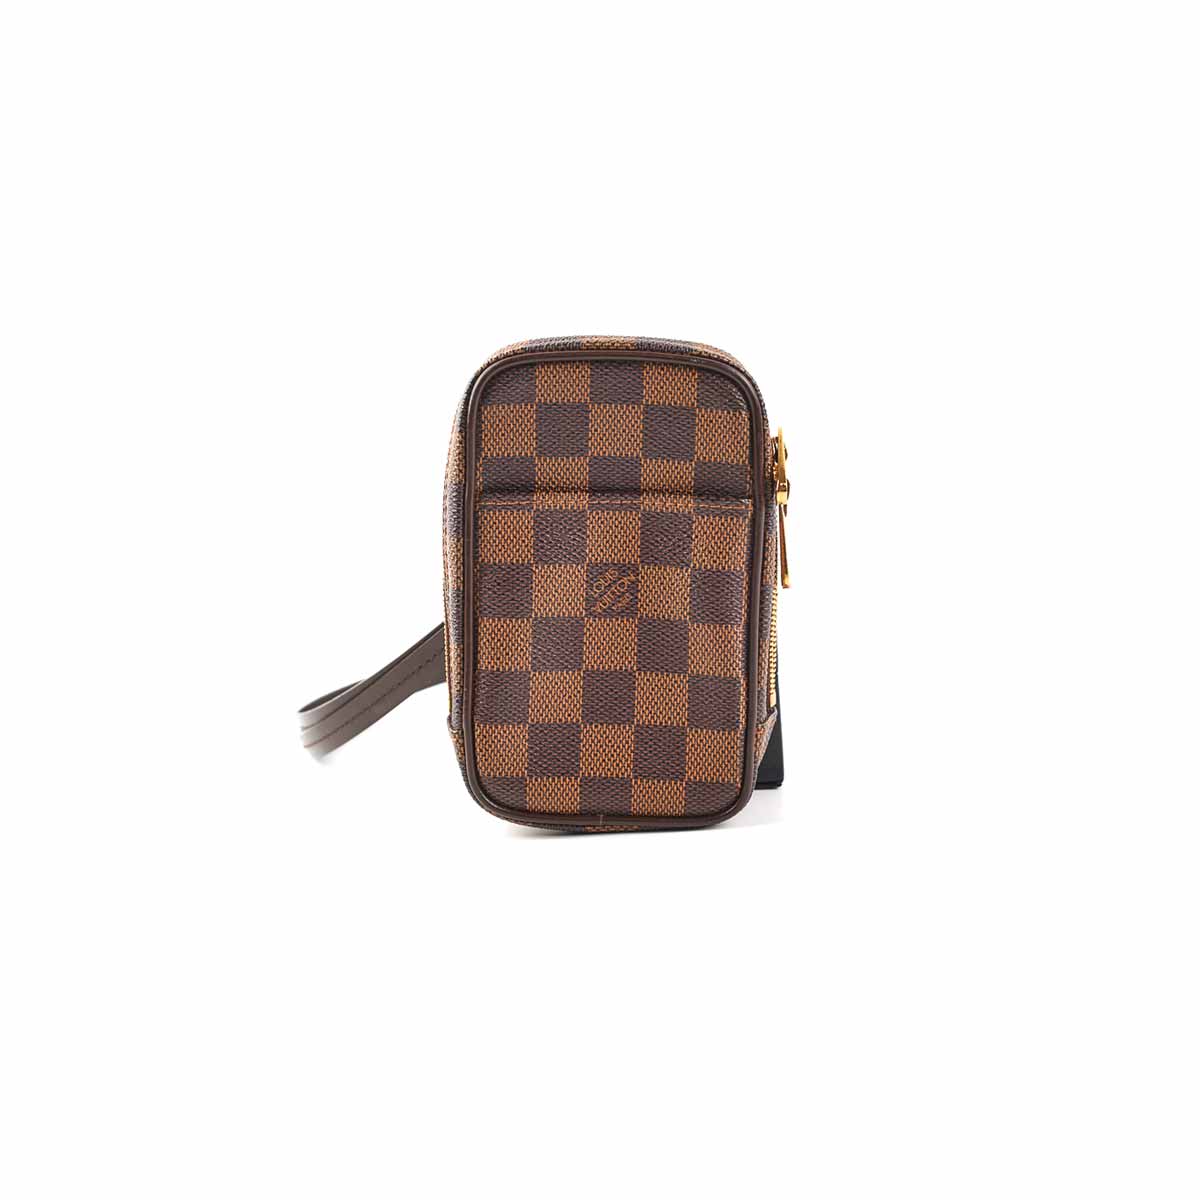 Rosalie Coin Purse Damier Ebene Canvas  Wallets and Small Leather Goods  LOUIS  VUITTON